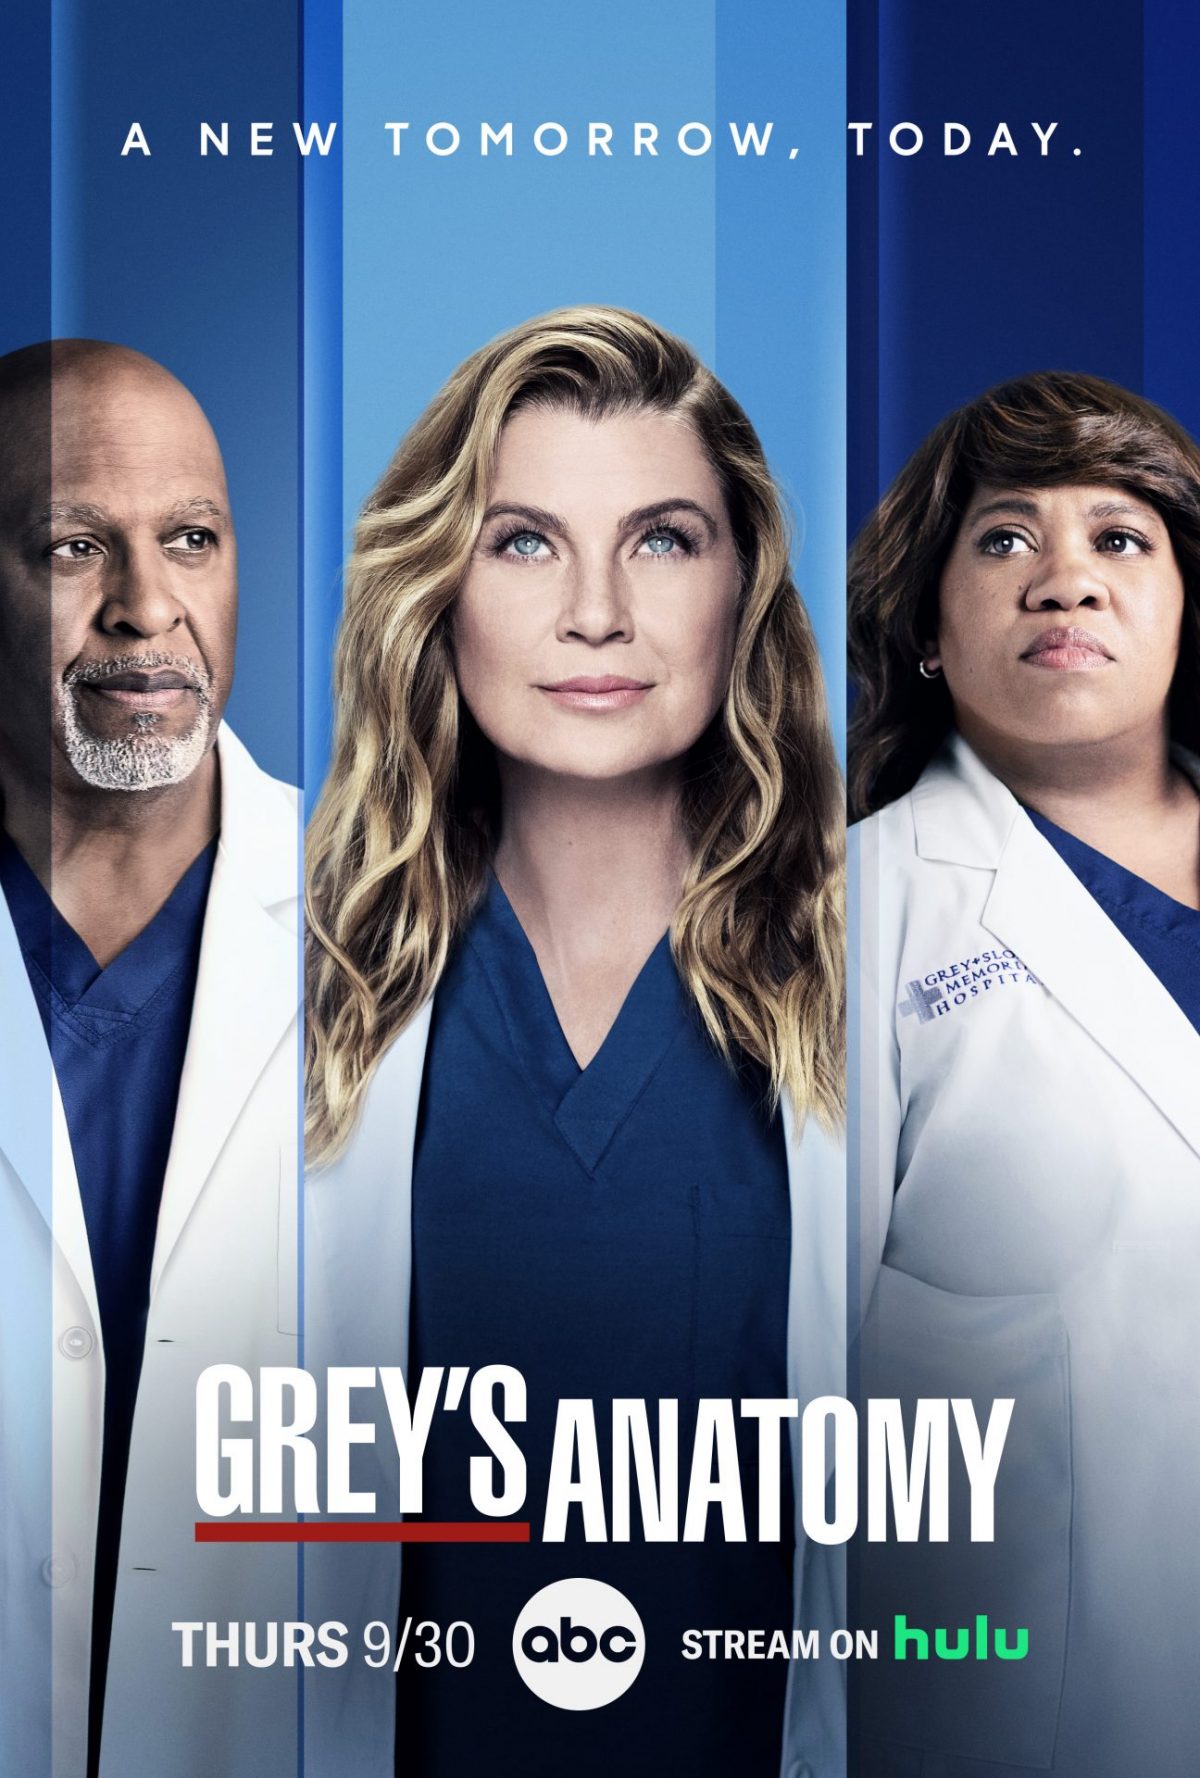 All the “Grey’s Anatomy” stars have talked about going on the show without Ellen Pompeo